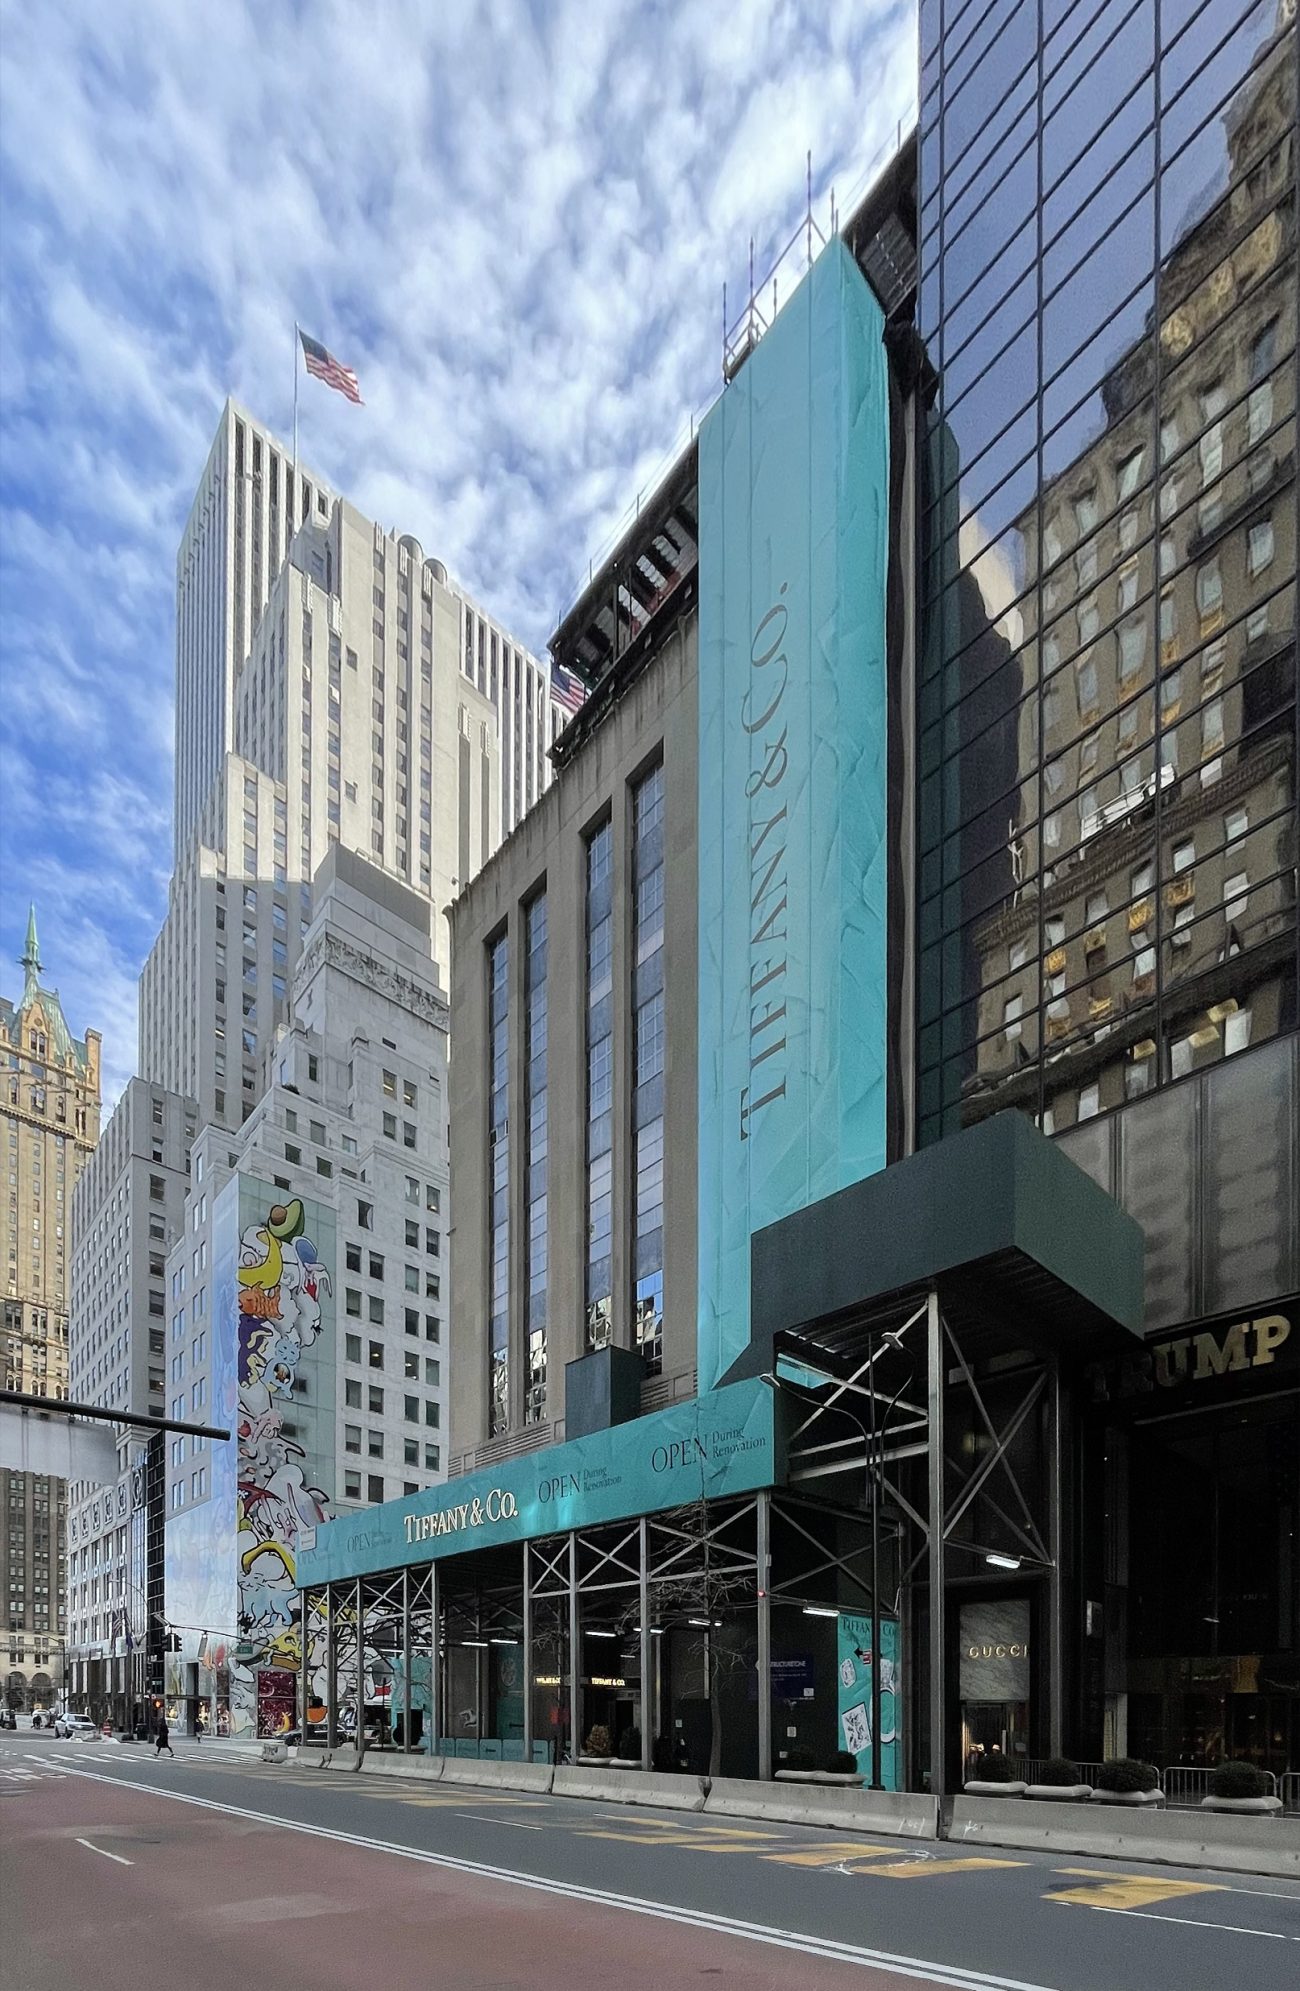 Tiffany & Co. - Tiffany & Co. is embarking on a transformation of its  iconic New York flagship store at 727 Fifth Avenue. Until the reinvention  is completed in 2022, customers are